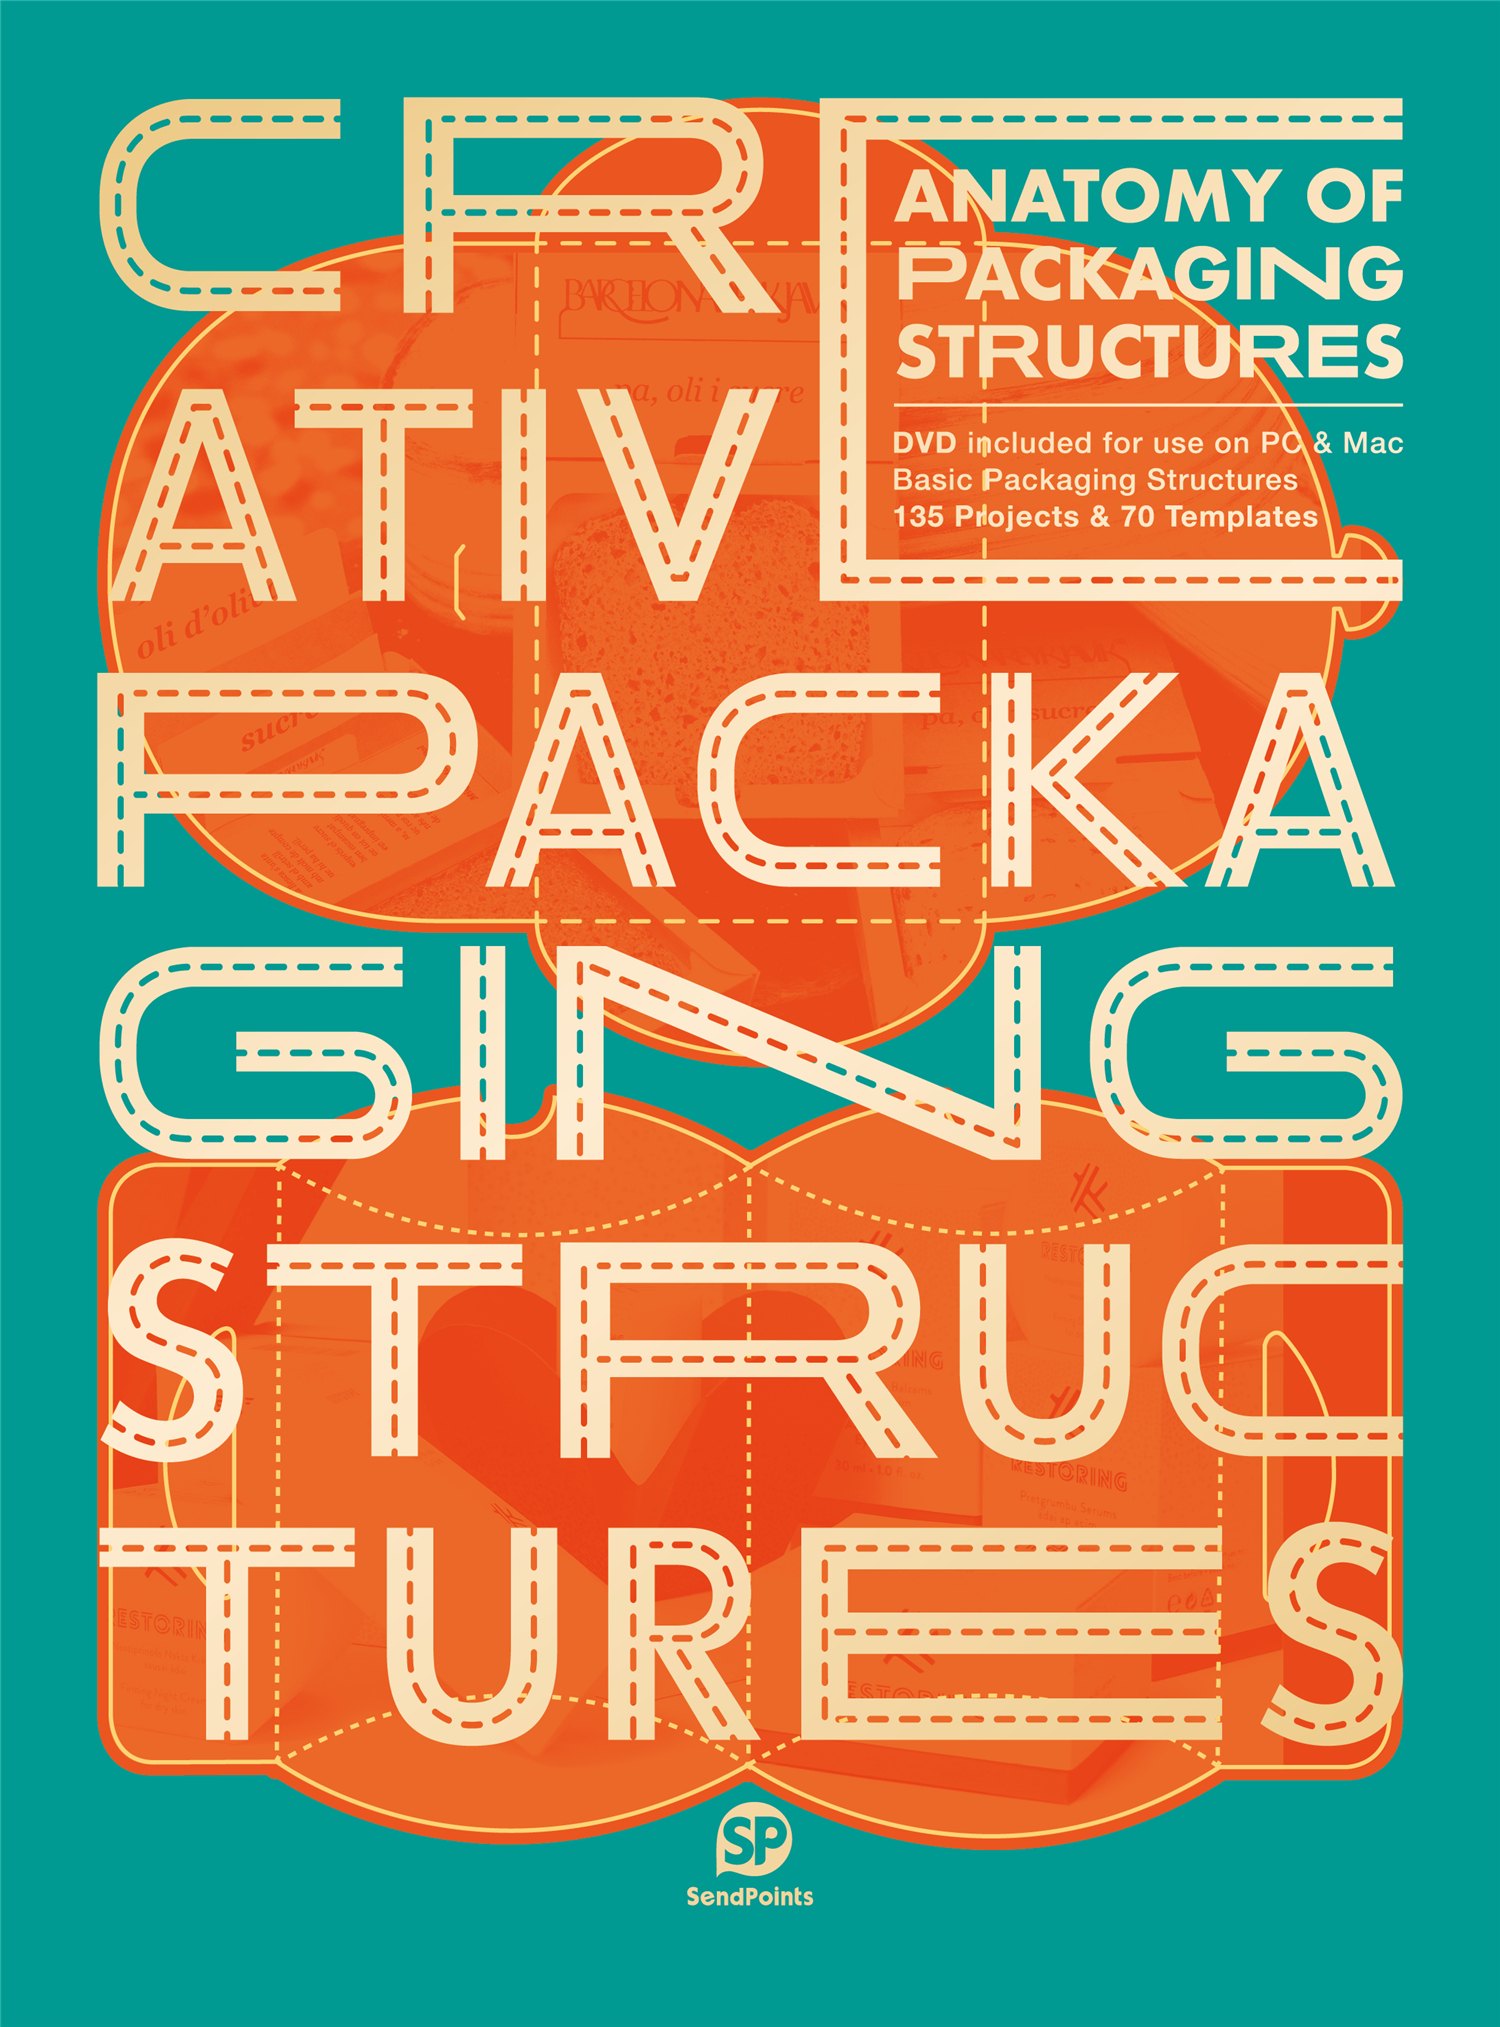 Anatomy of Packaging Structures 创意盒子－包装结构解剖书